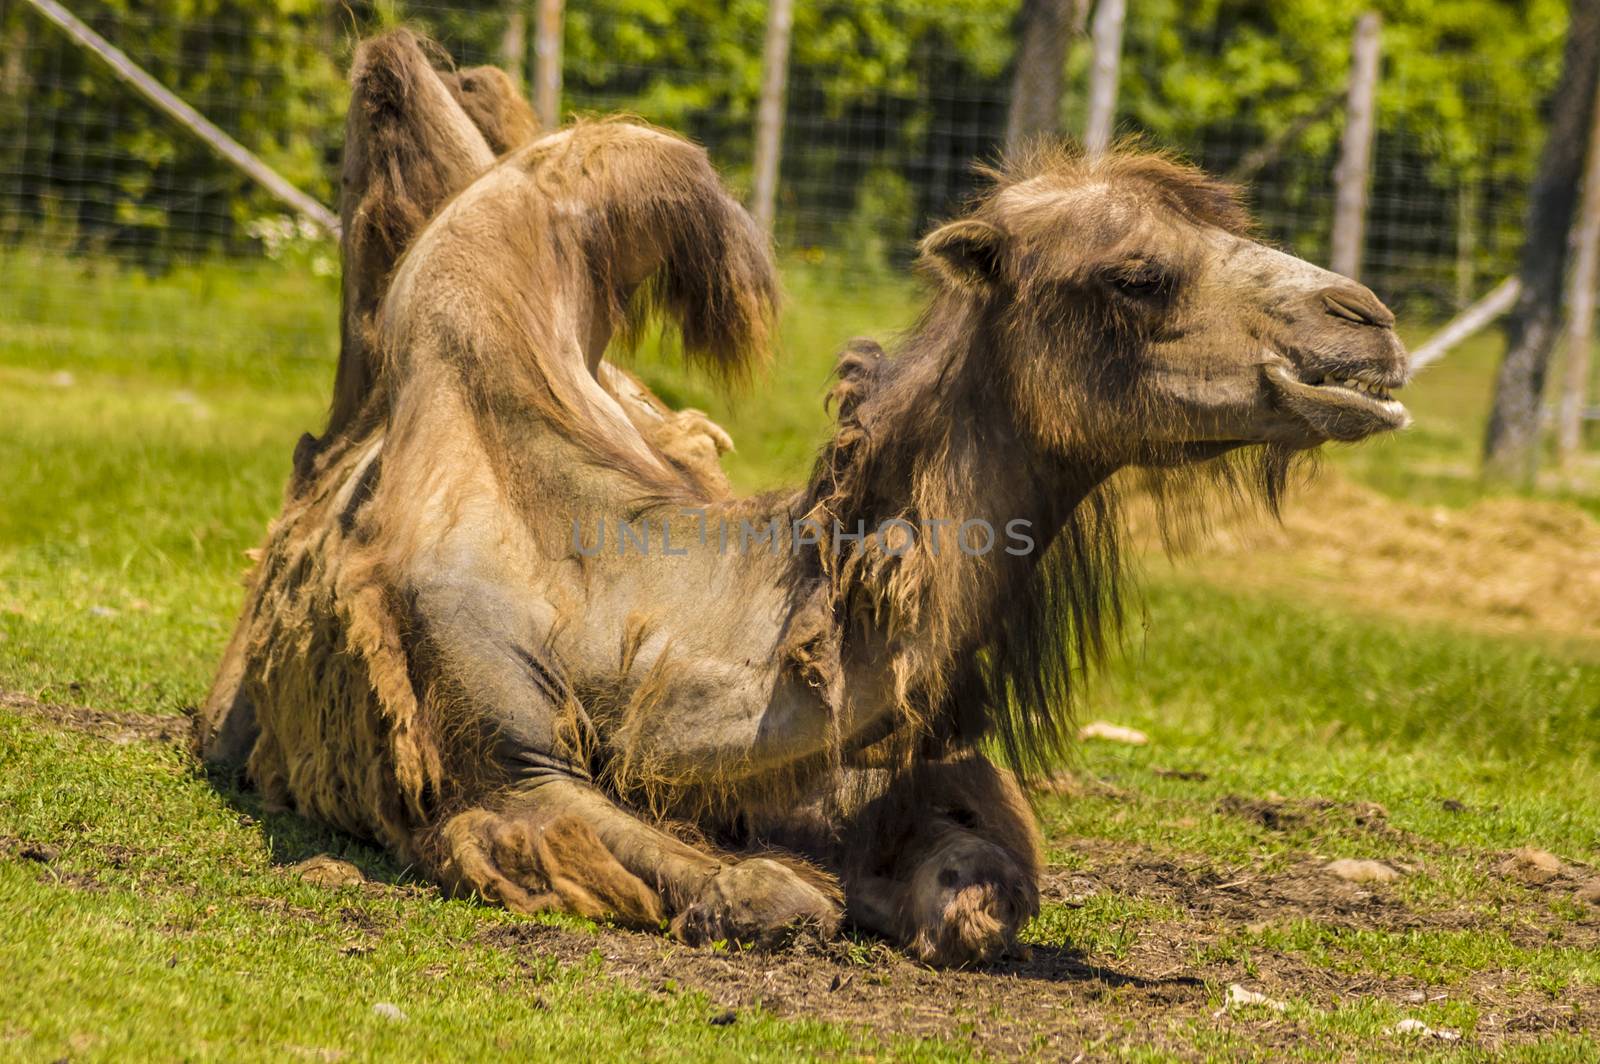 view of a camel laying in the grass